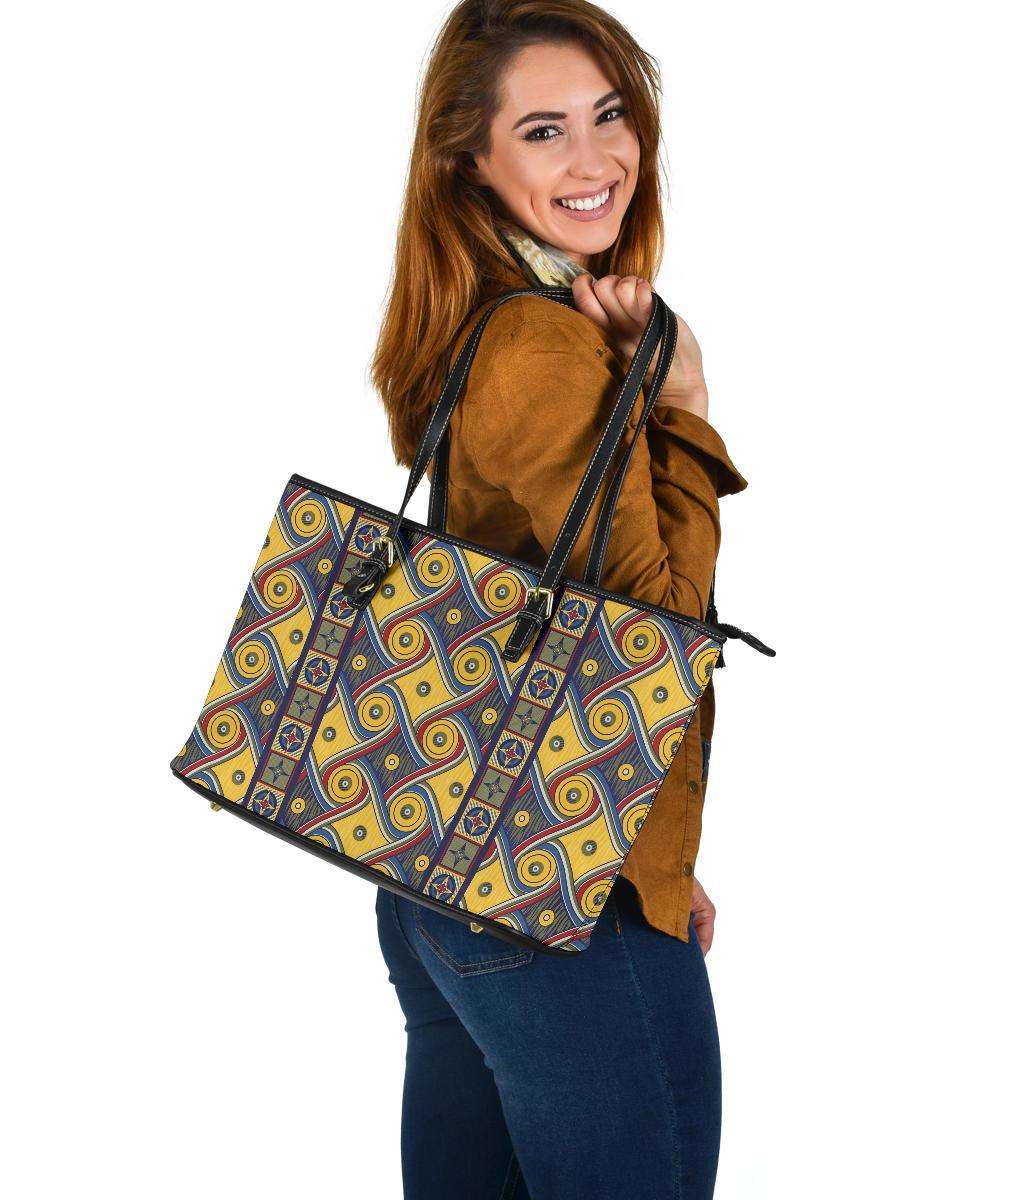 Designs by MyUtopia Shout Out:My Happy Place Gallifrey One Carpet Vegan Leather Tote Purse,Large (11 x 17 x 6) inches / Multi,tote bag purse